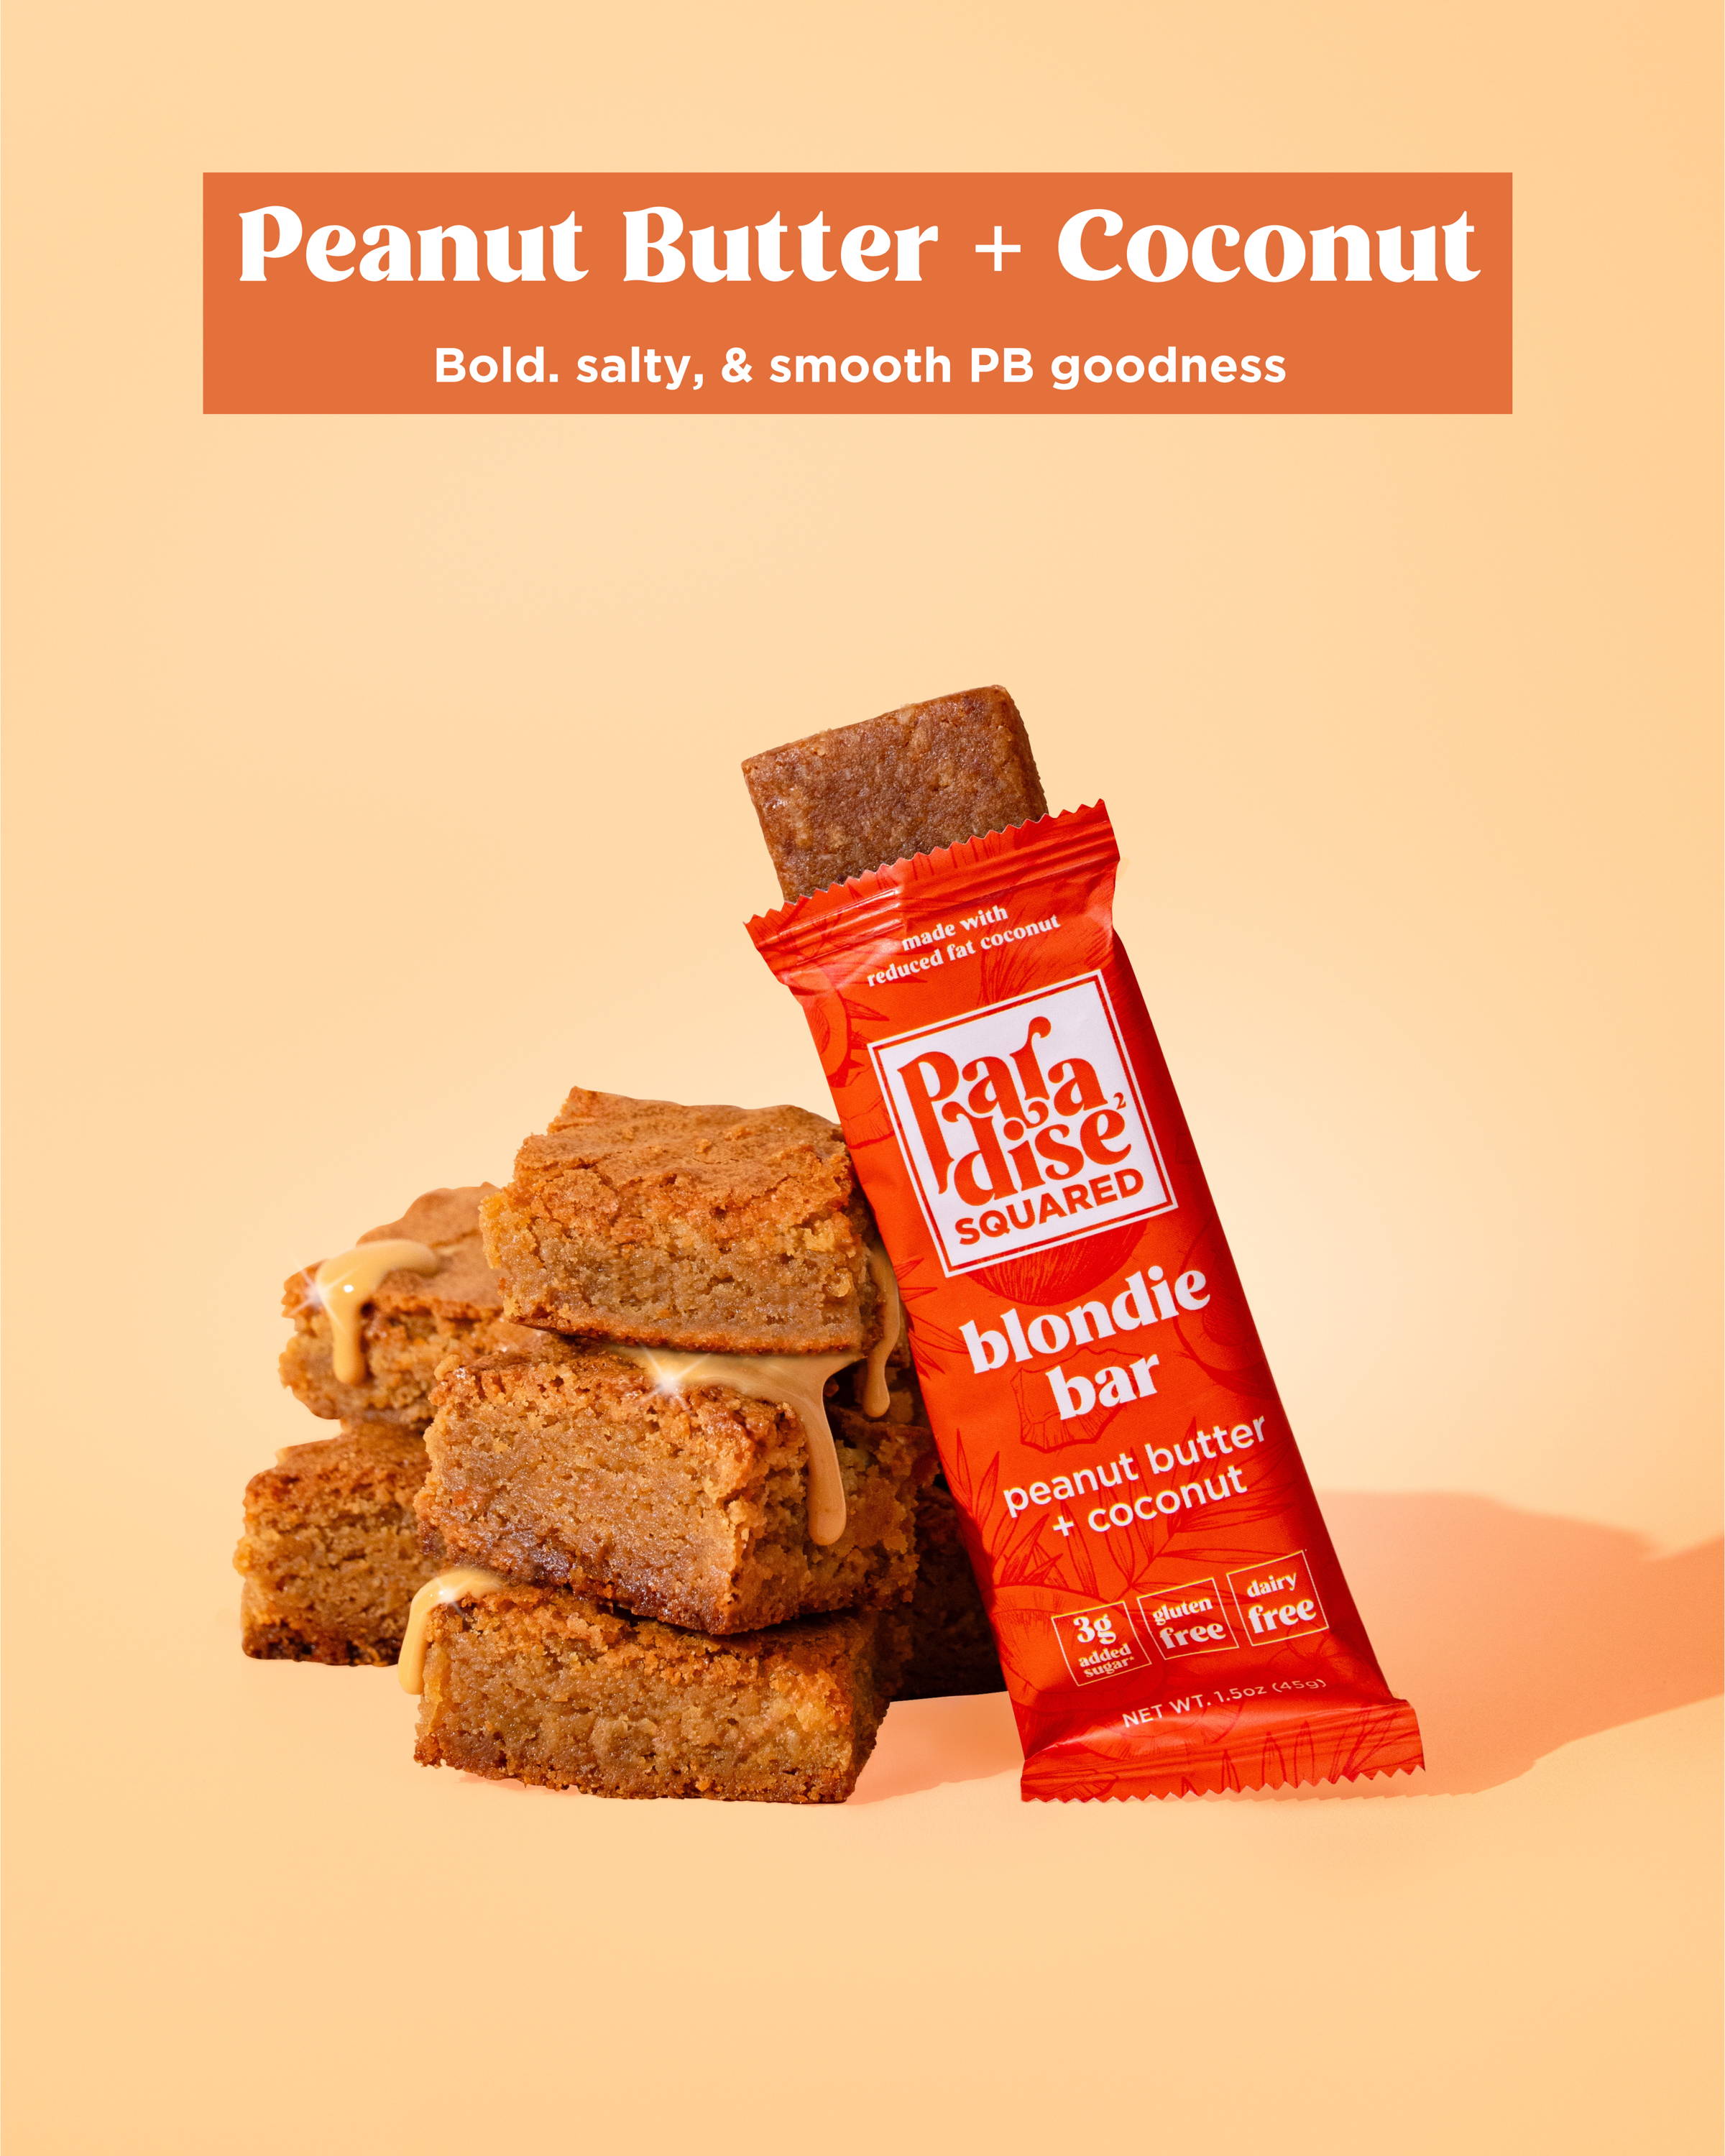 Peanut Butter + Coconut - Bold, salty, & smooth PB goodness